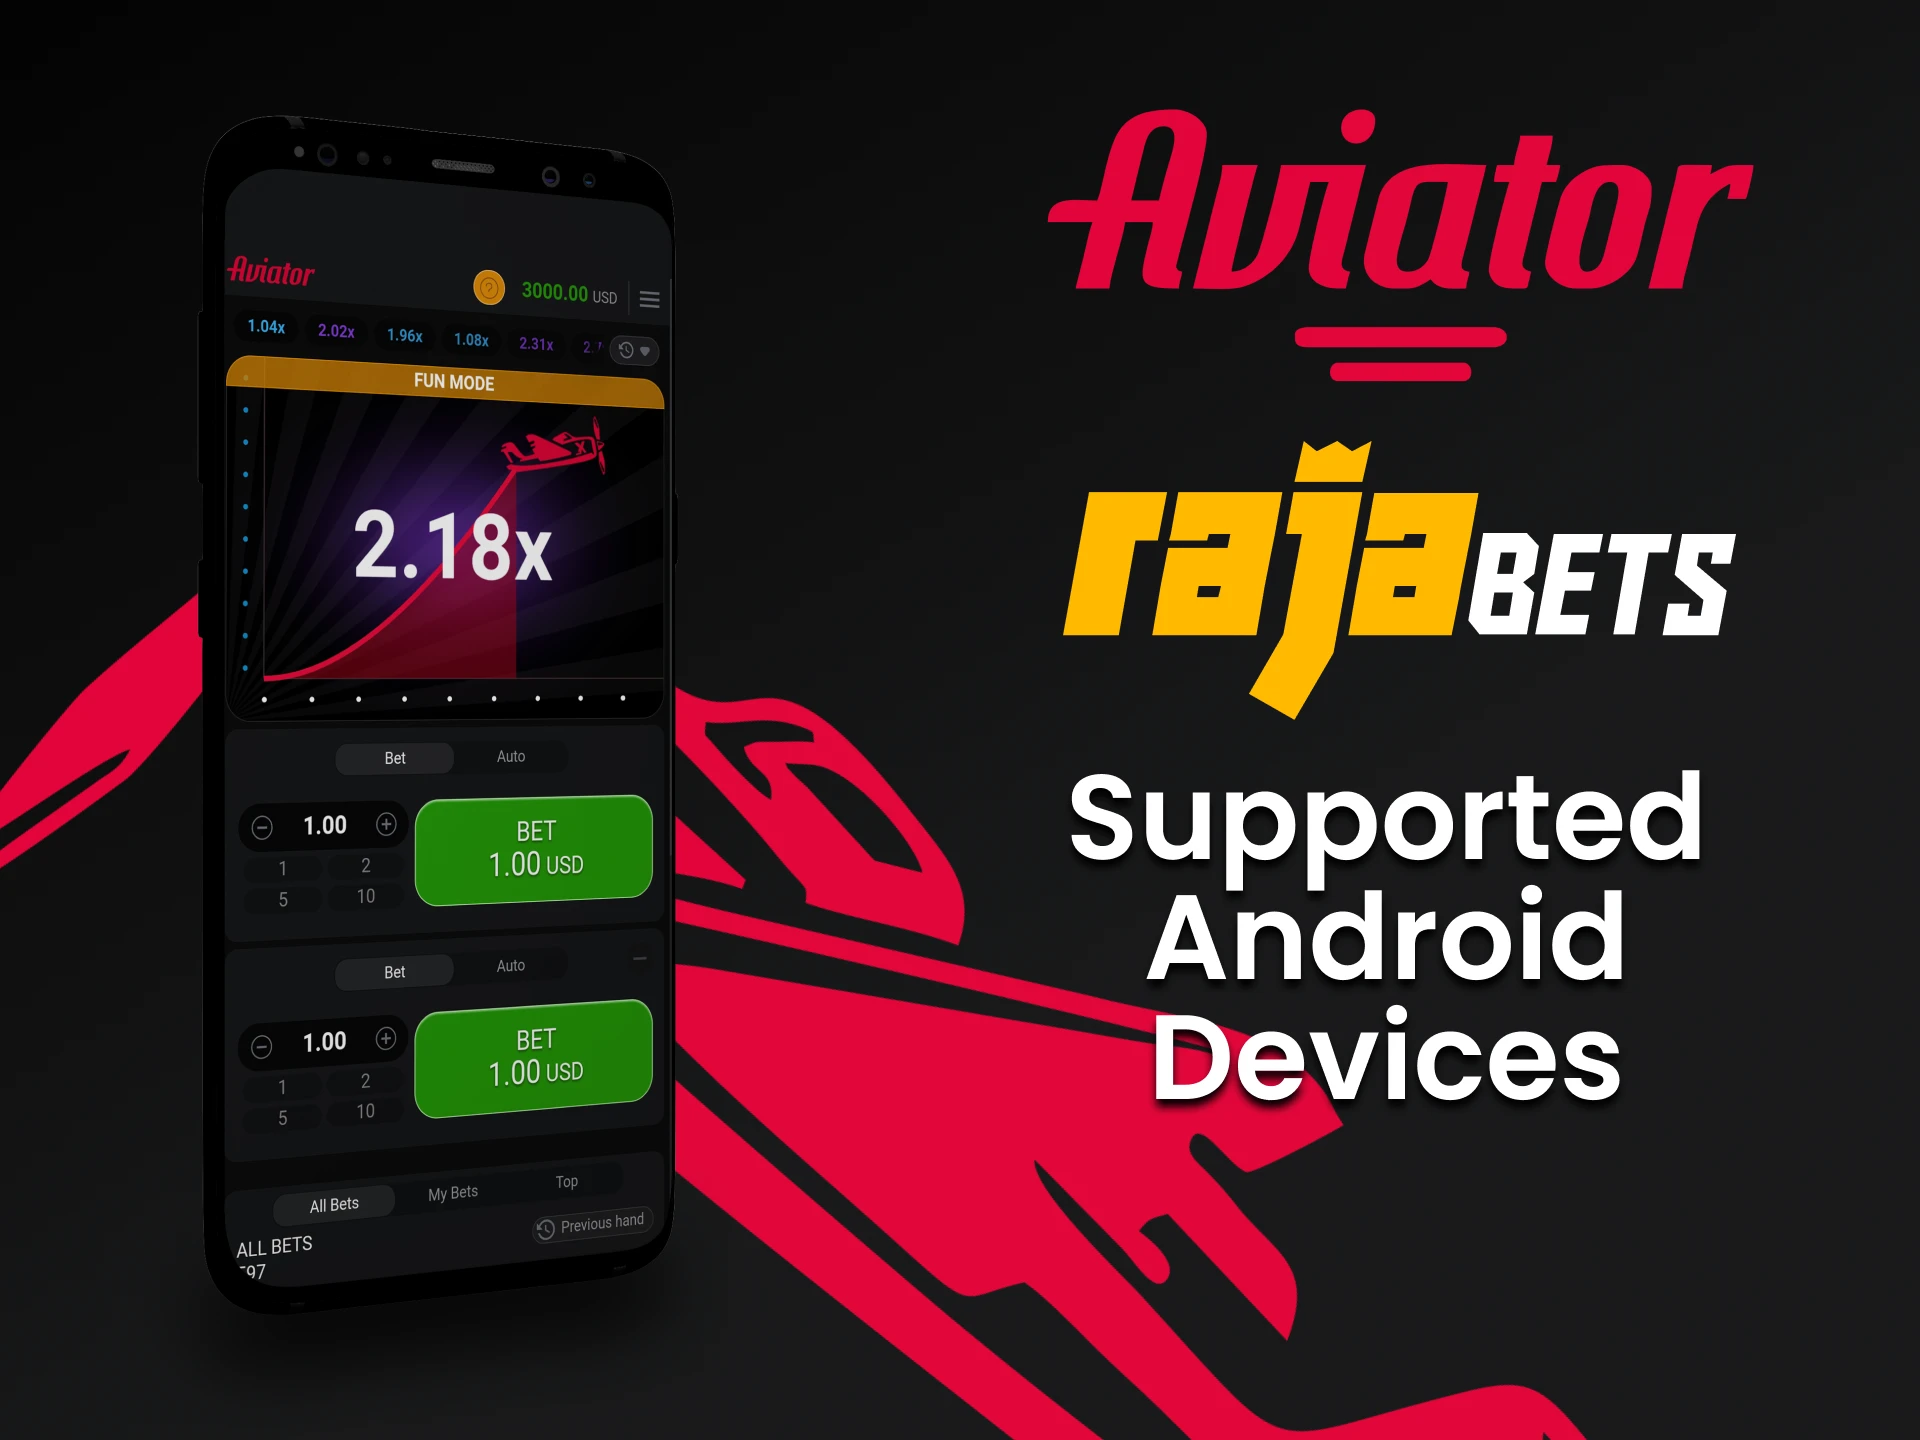 Use your android device to play Aviator by Rajabets.